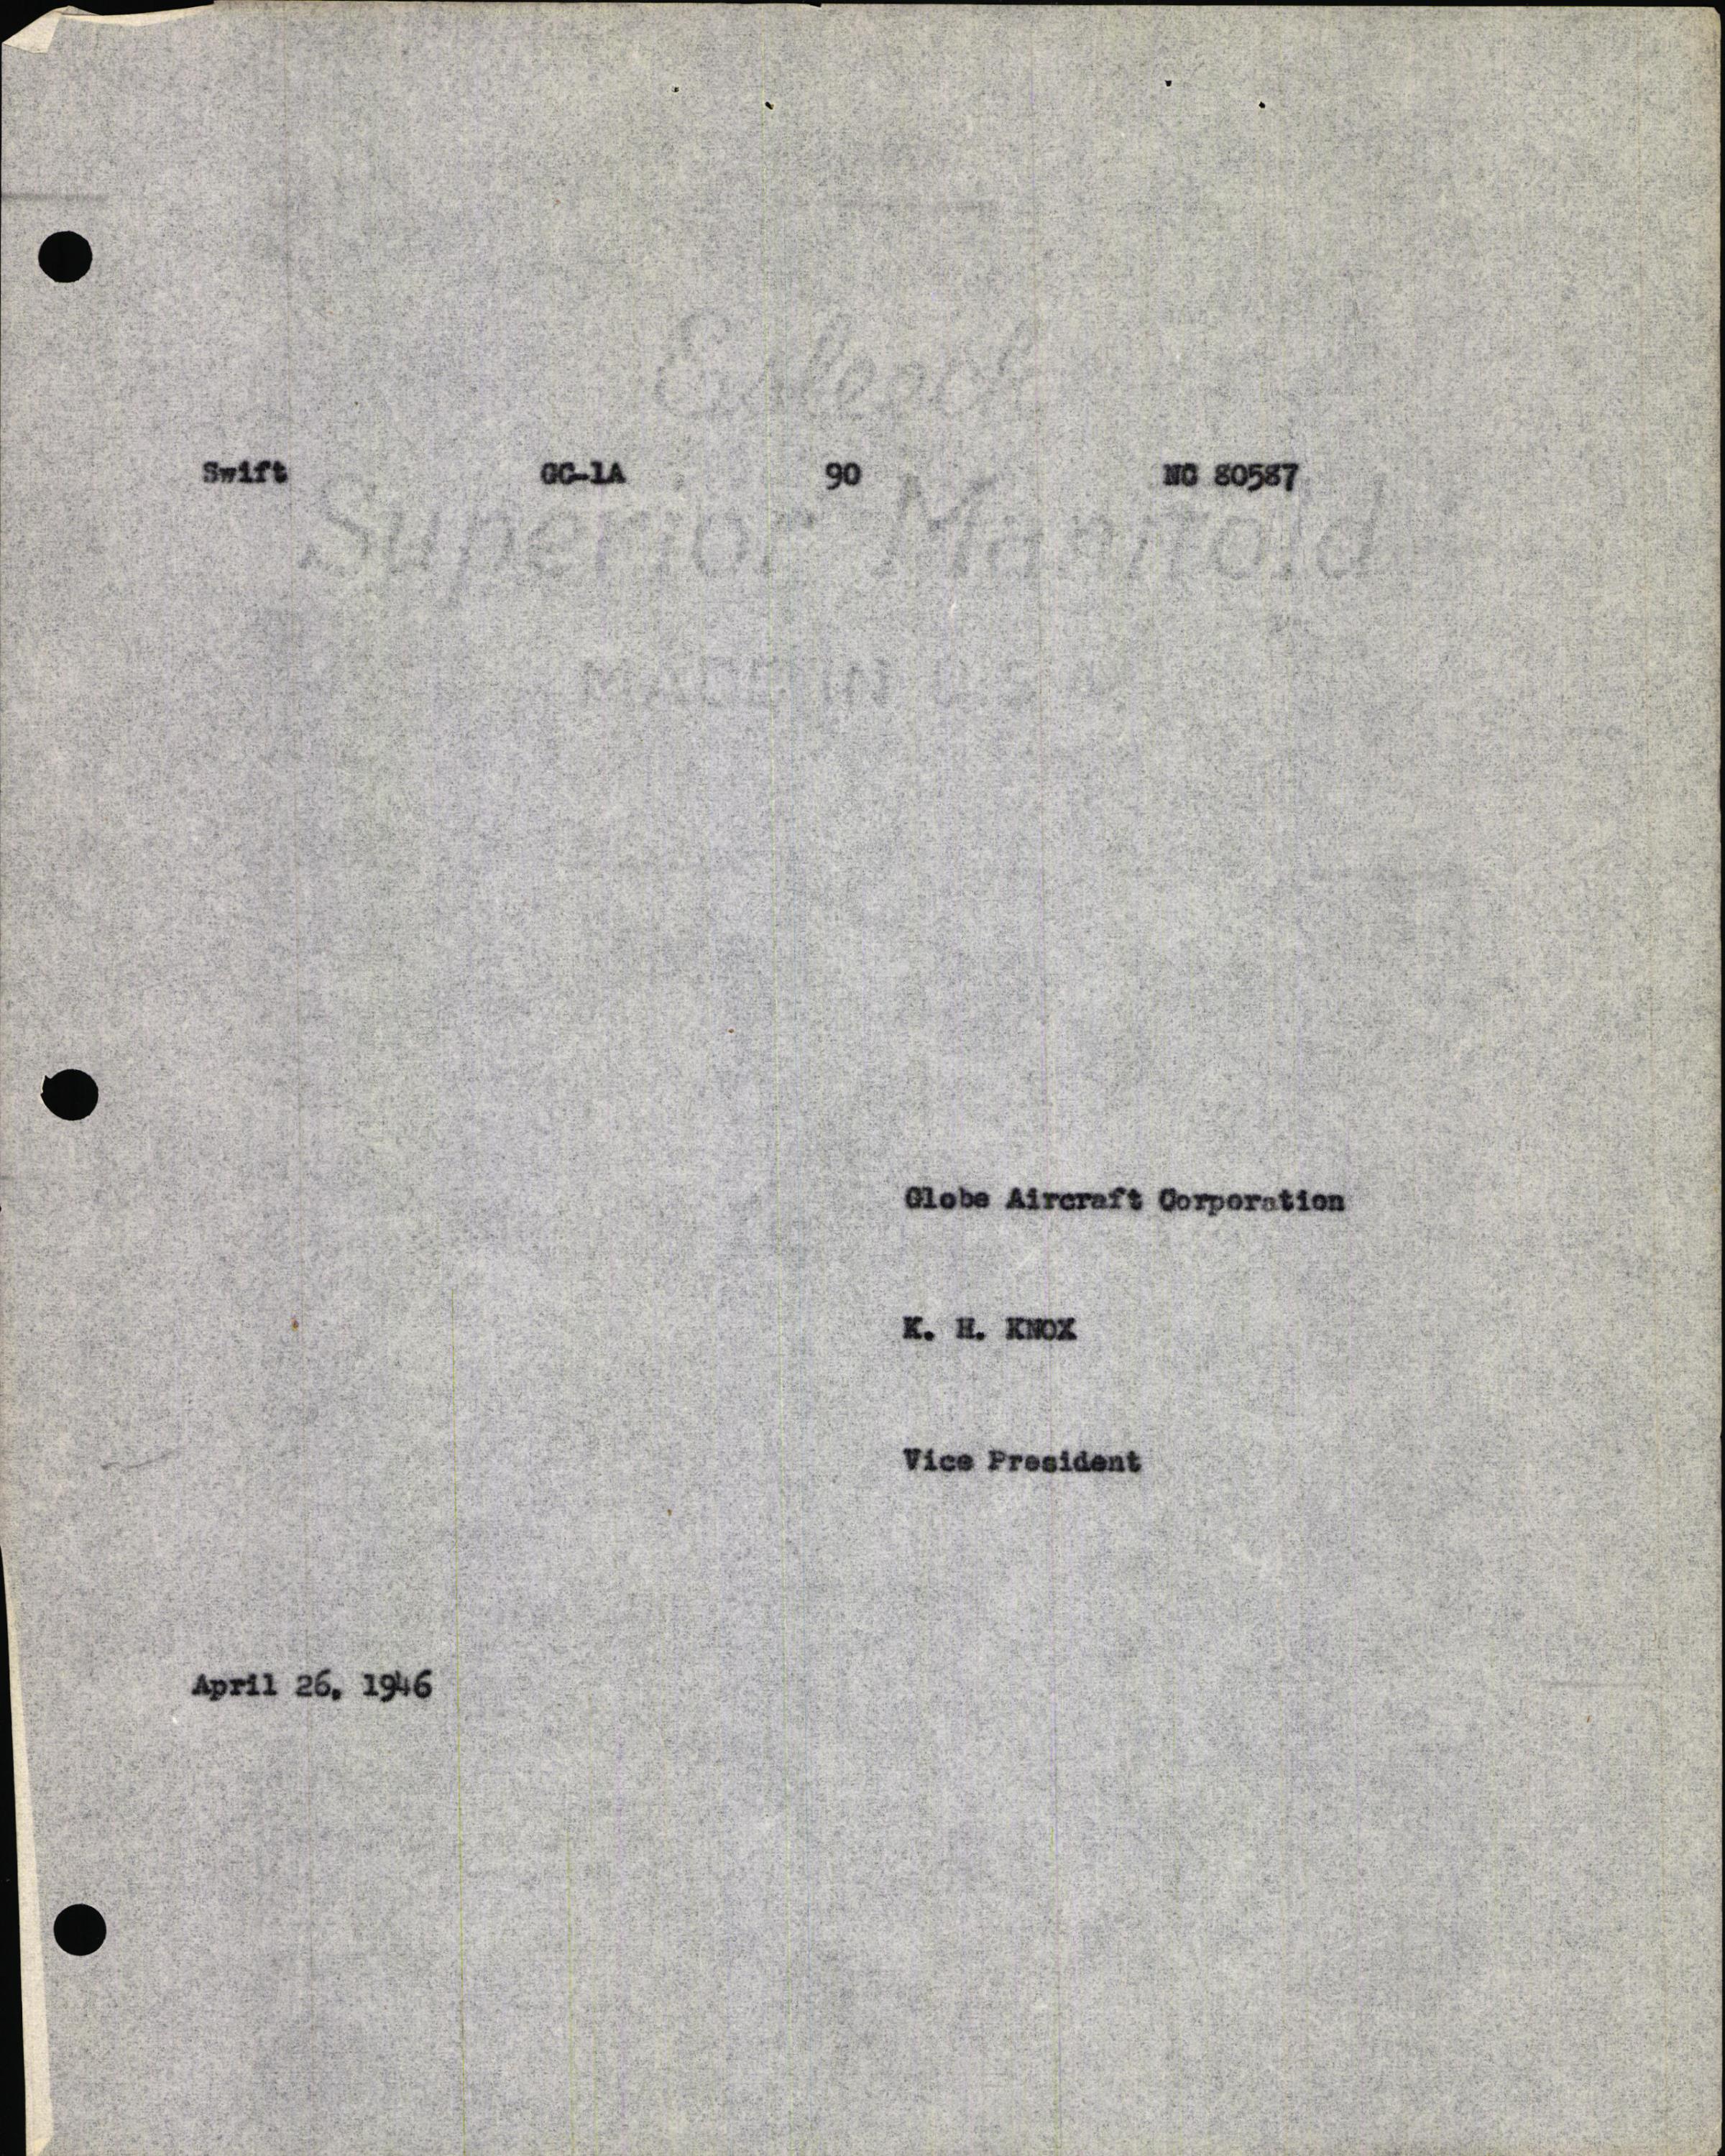 Sample page 11 from AirCorps Library document: Technical Information for Serial Number 90